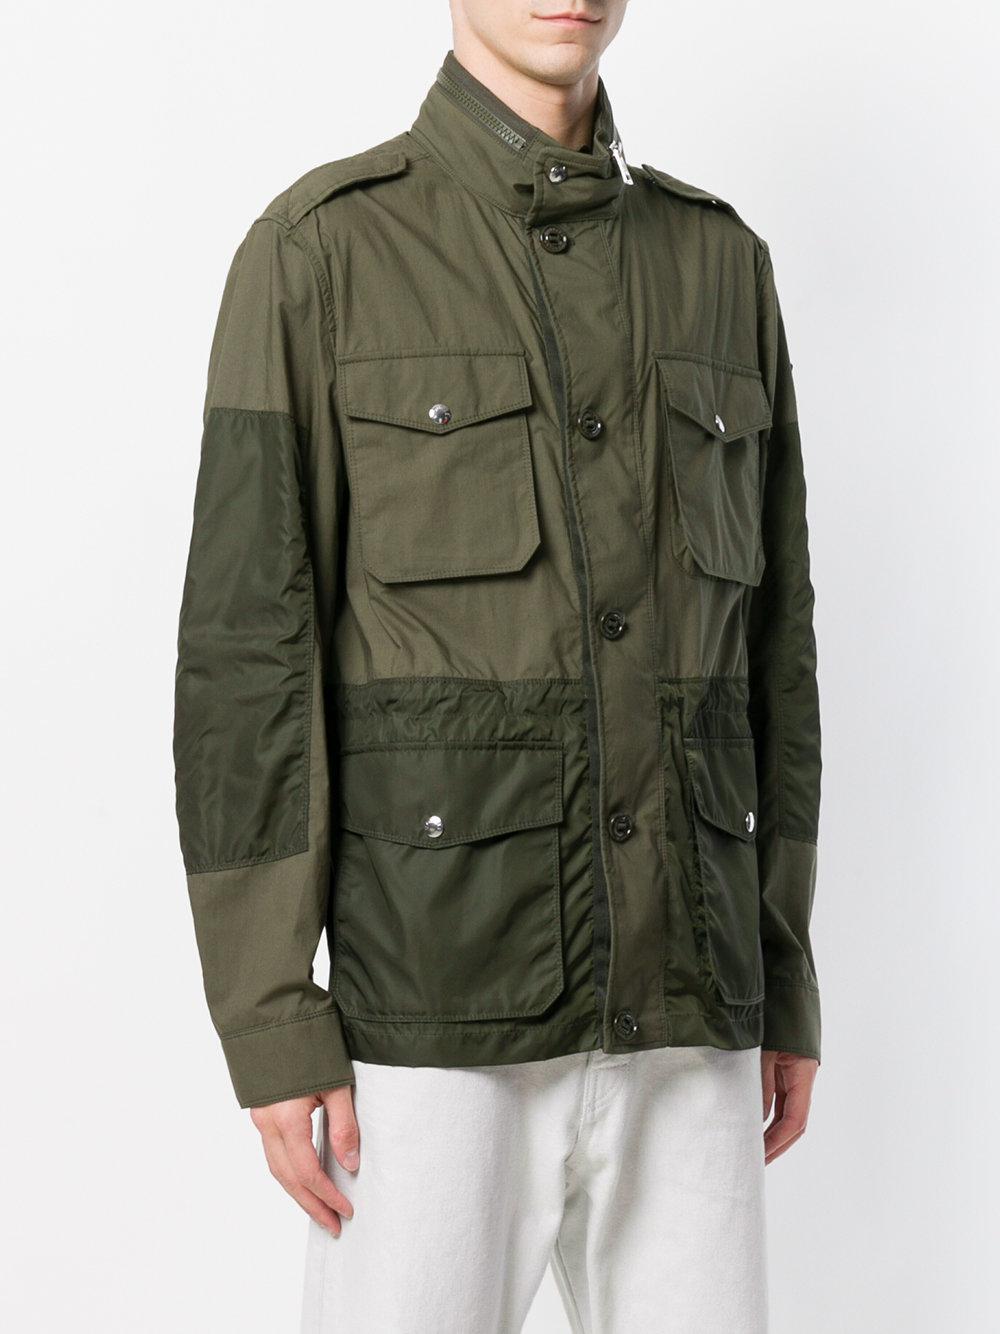 Moncler Cotton Agard Field Jacket in Green for Men - Lyst